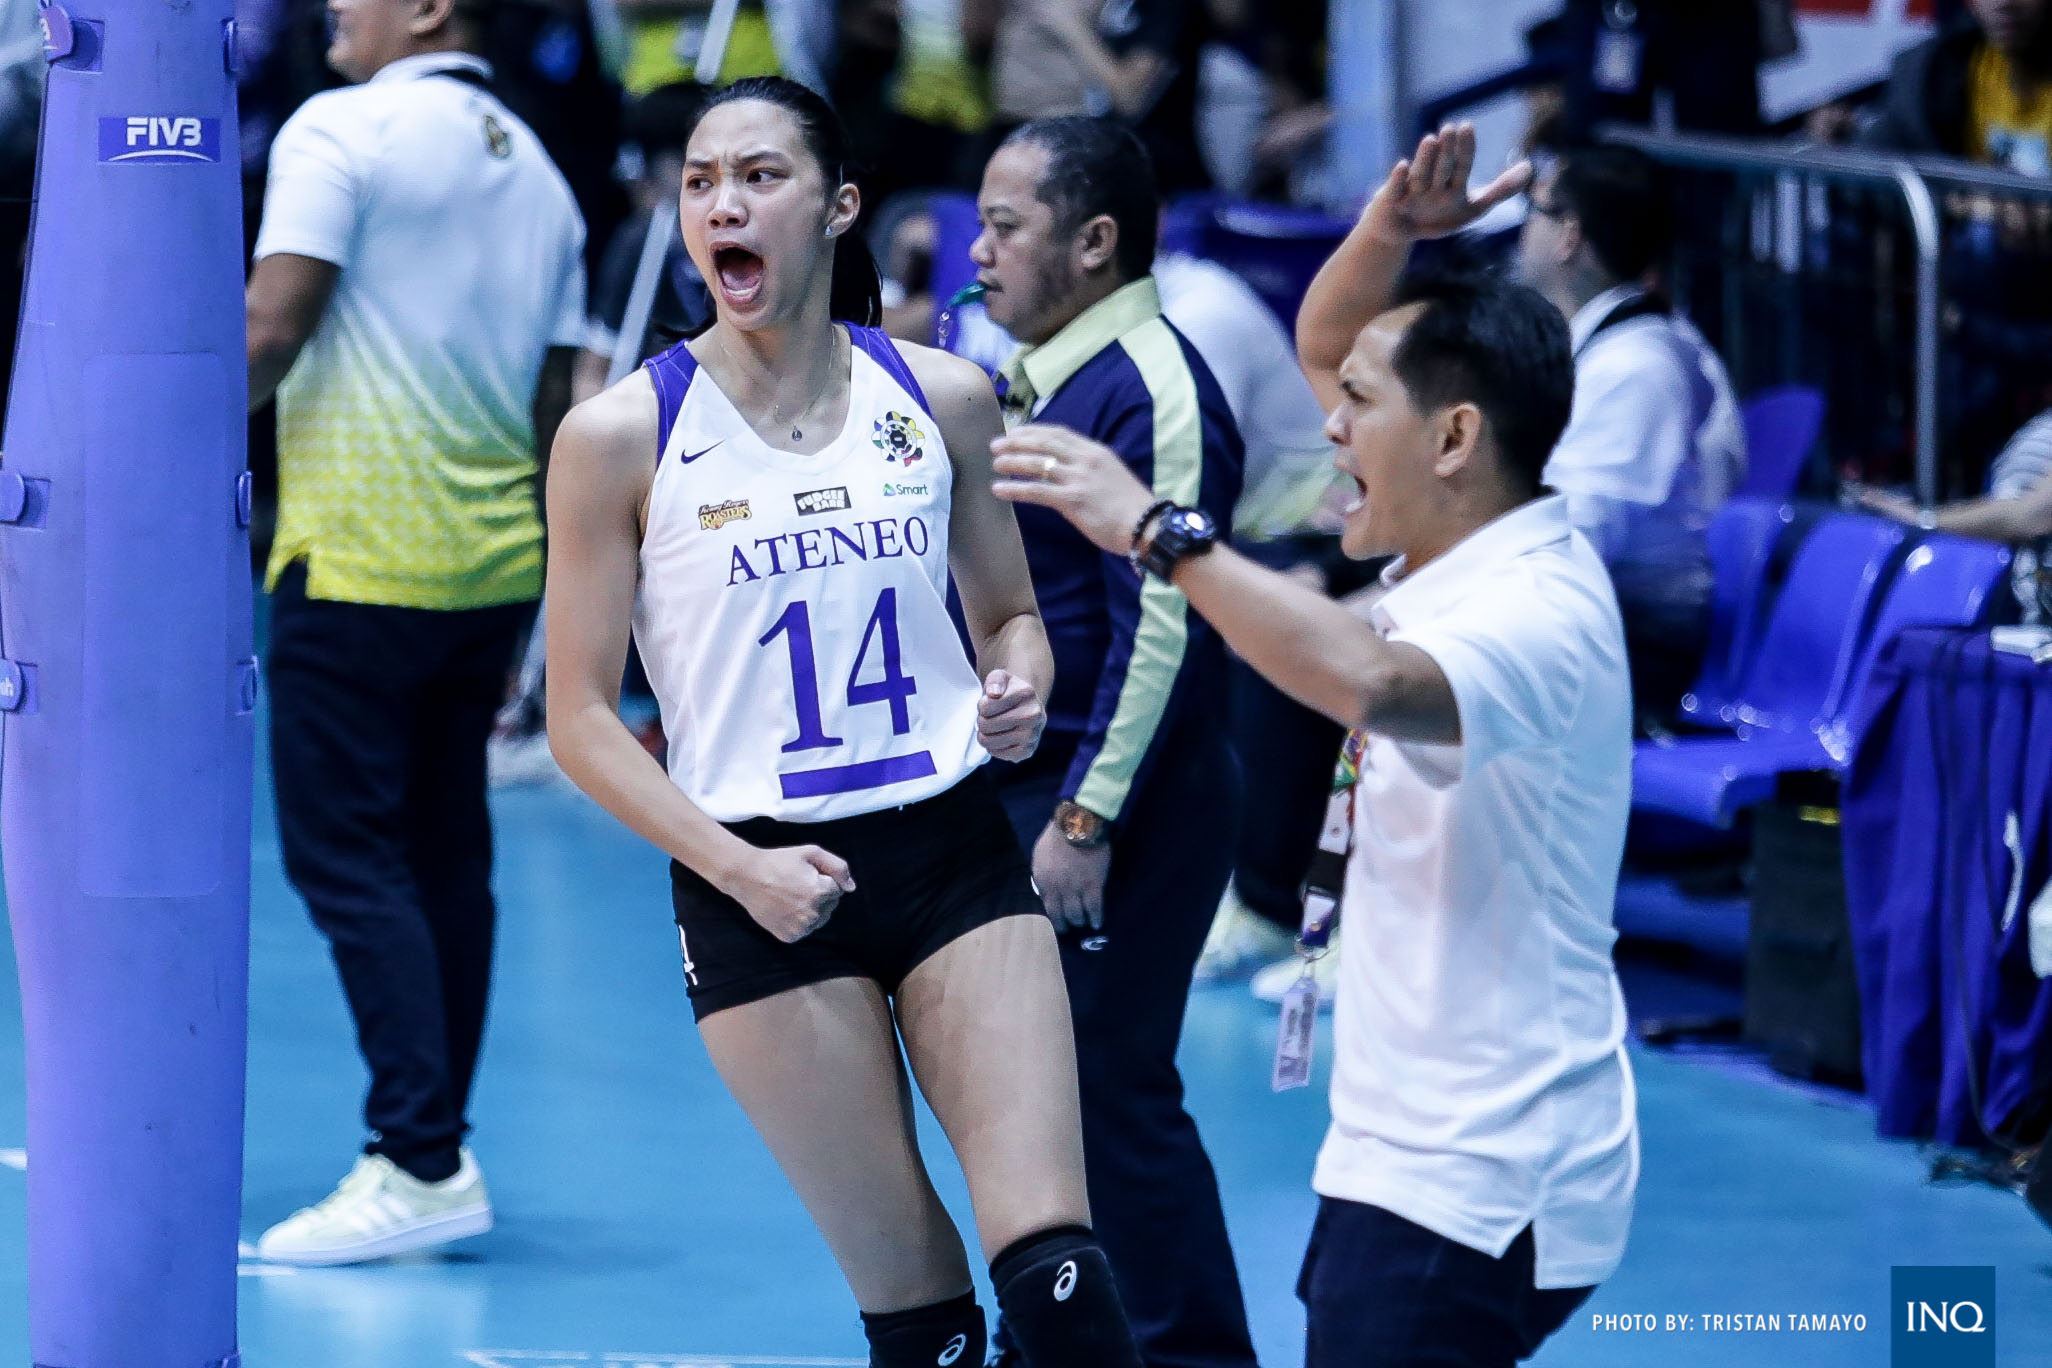 UAAP volleyball: Ateneo bounces back, holds off UST for first win